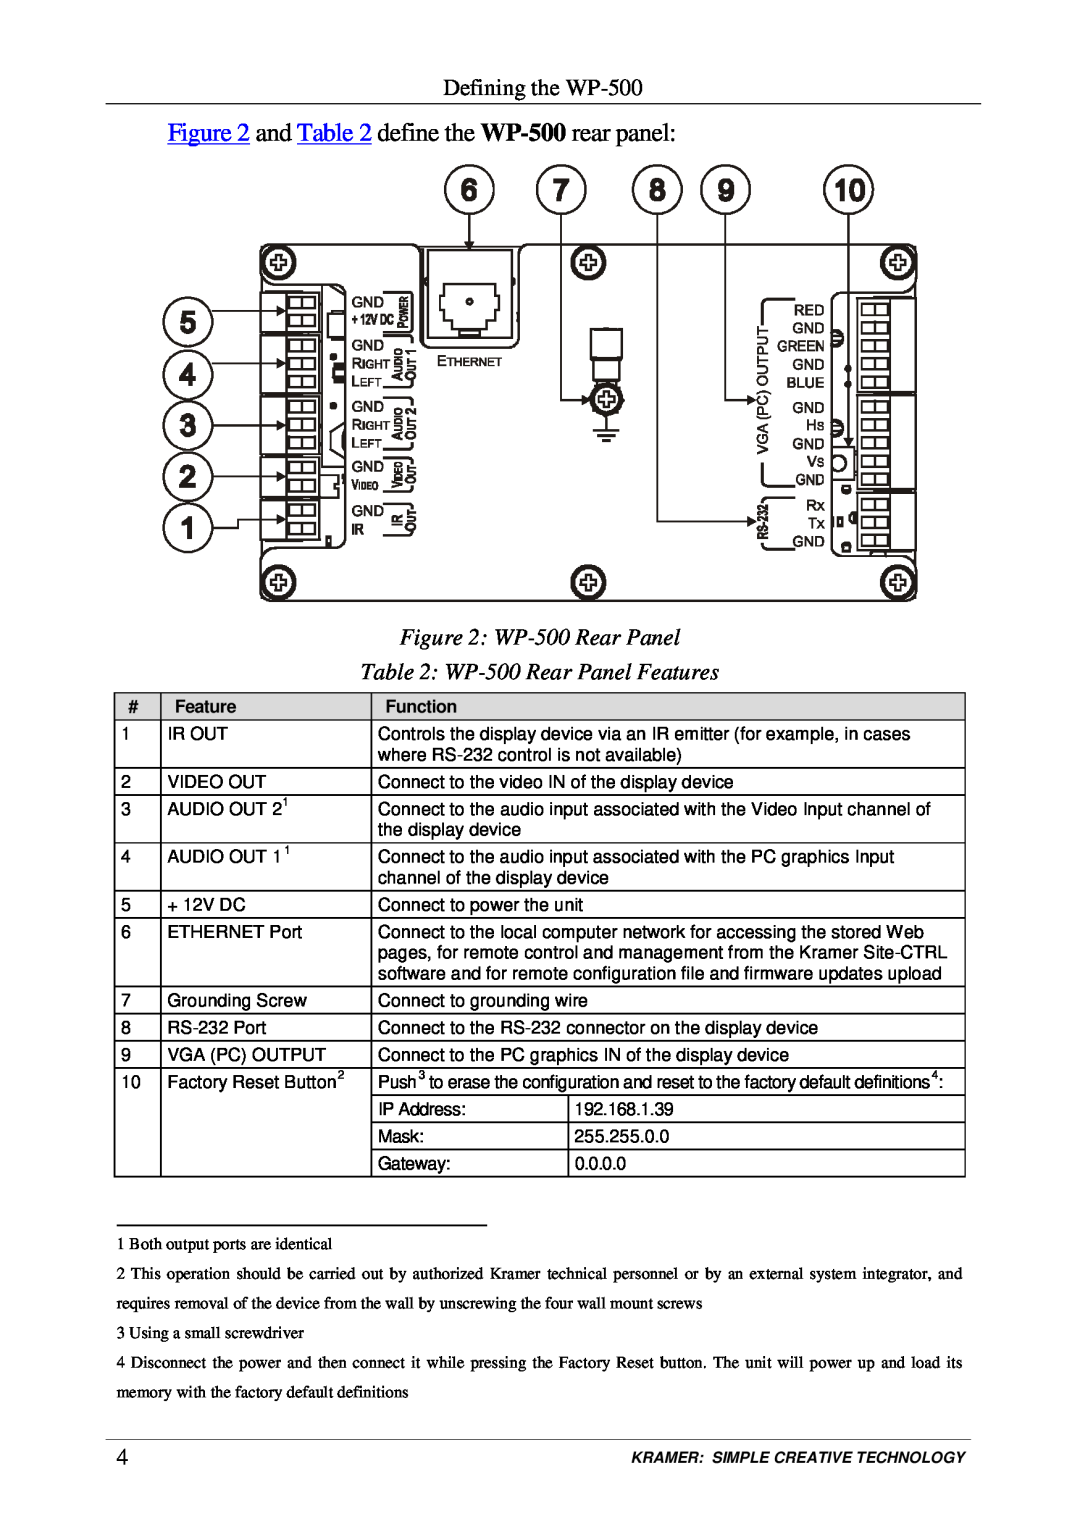 Kramer Electronics user manual Defining the WP-500, WP-500Rear Panel Features, Function 